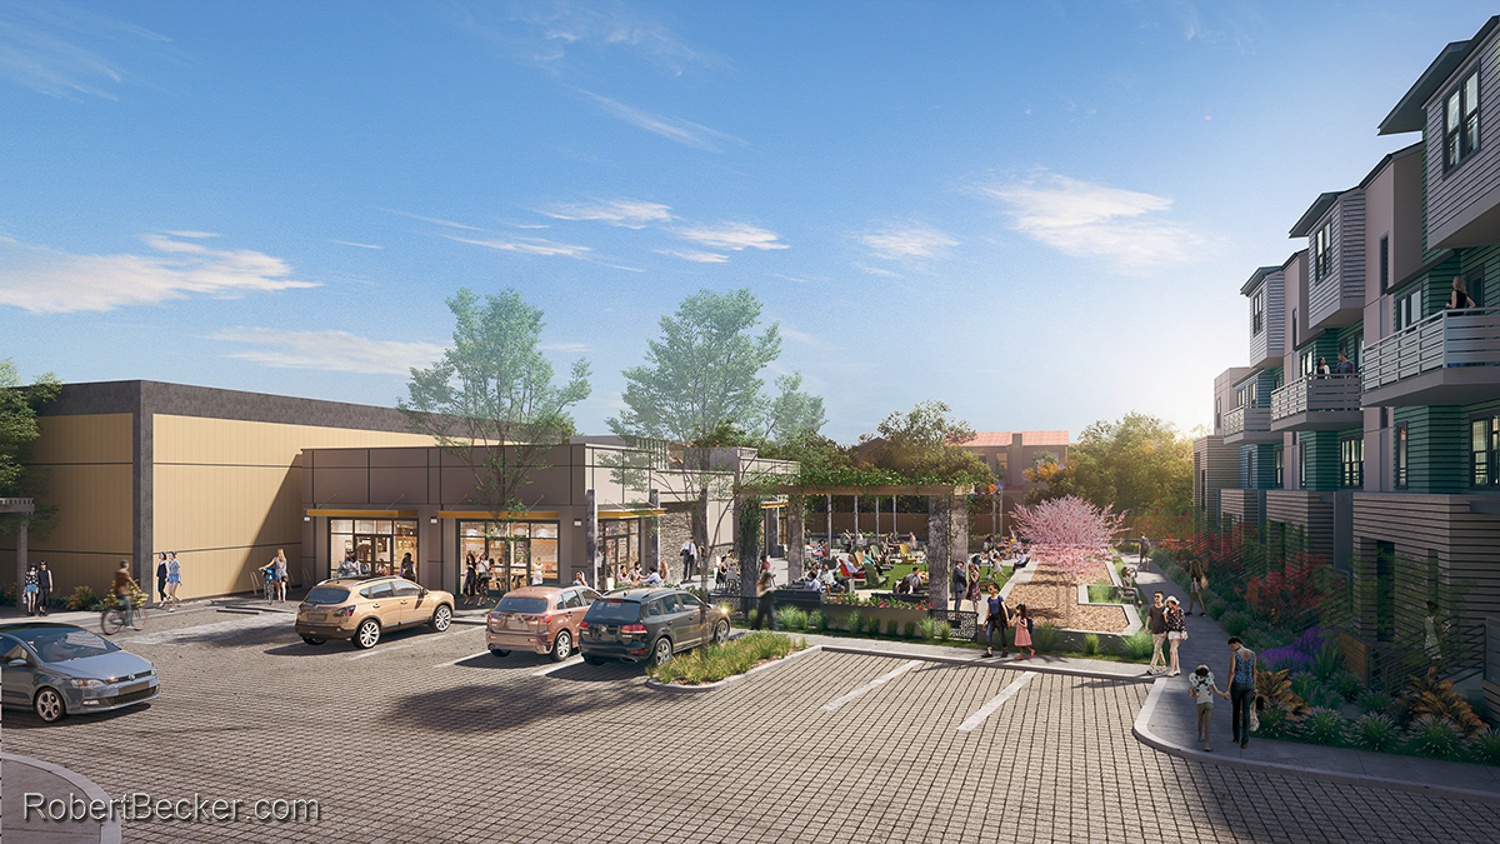 Fremont Corners Two commercial structure, rendering by Robert Becker of SDG Architects design